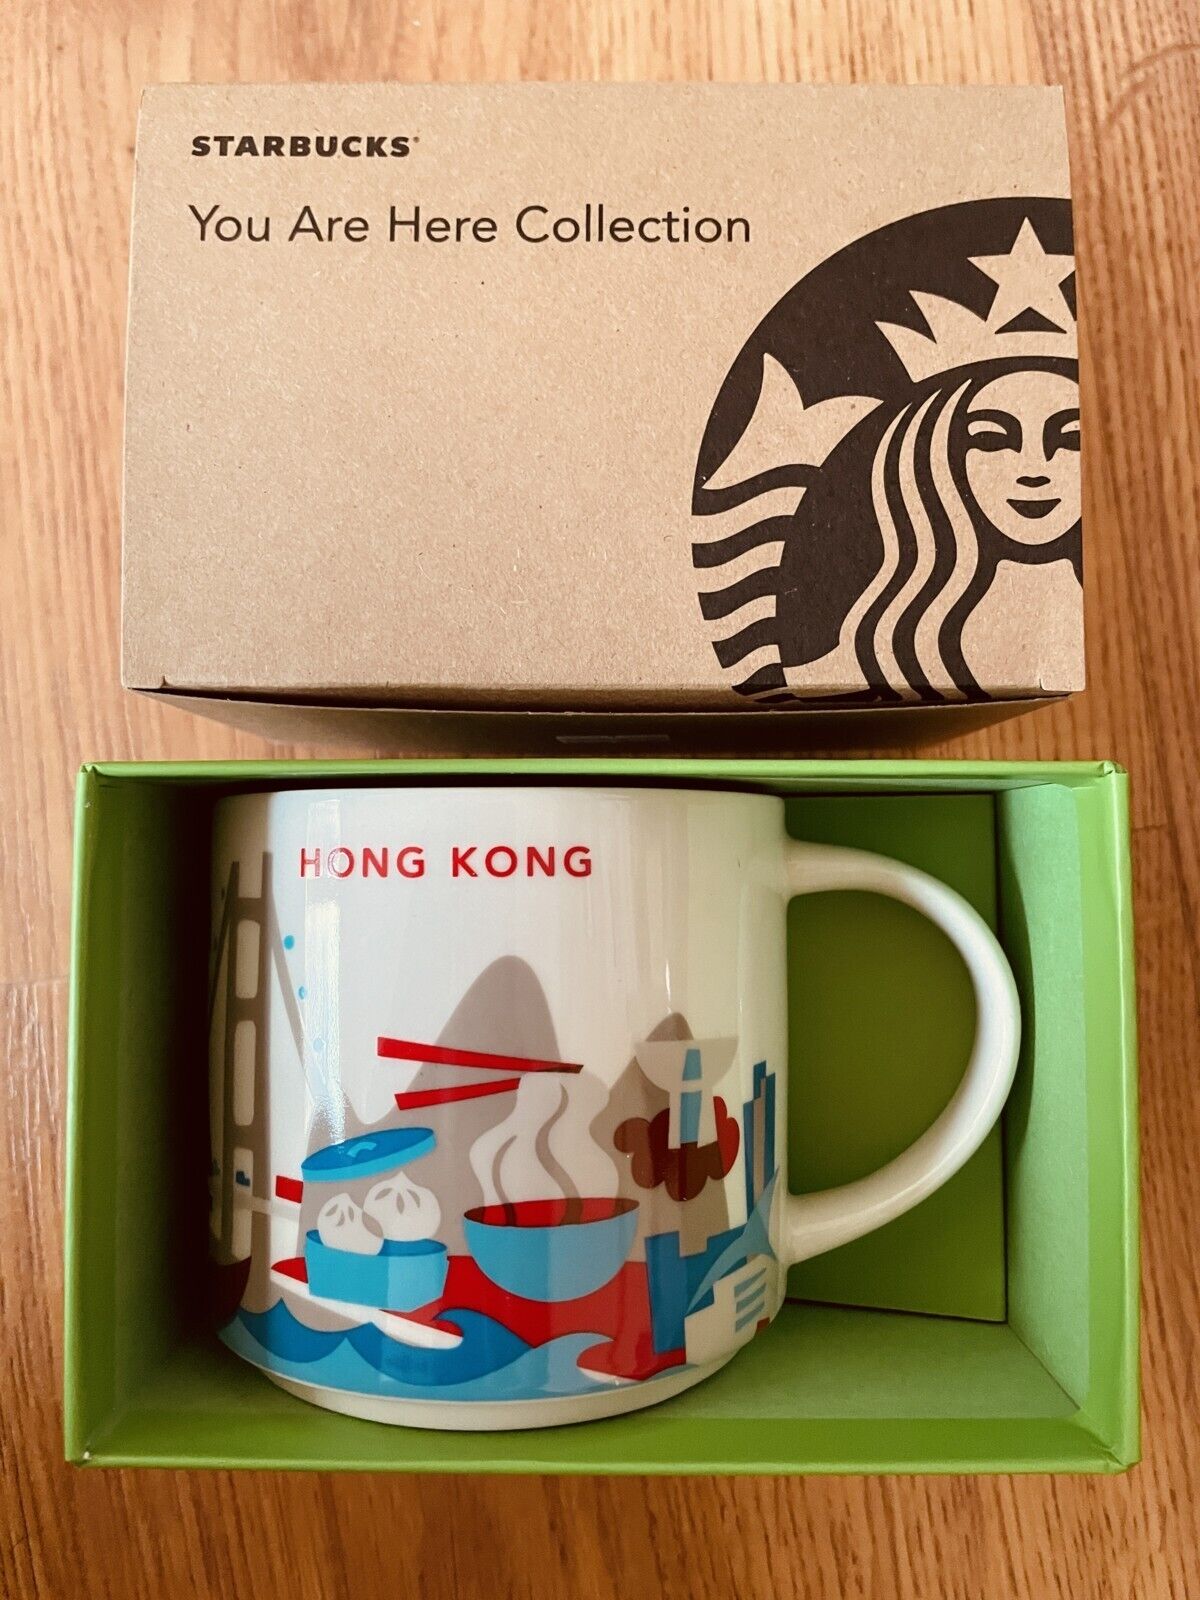 Starbucks HONG KONG 2013 You Are Here YAH 14 oz coffee mug AUTHENTIC NEW IN BOX